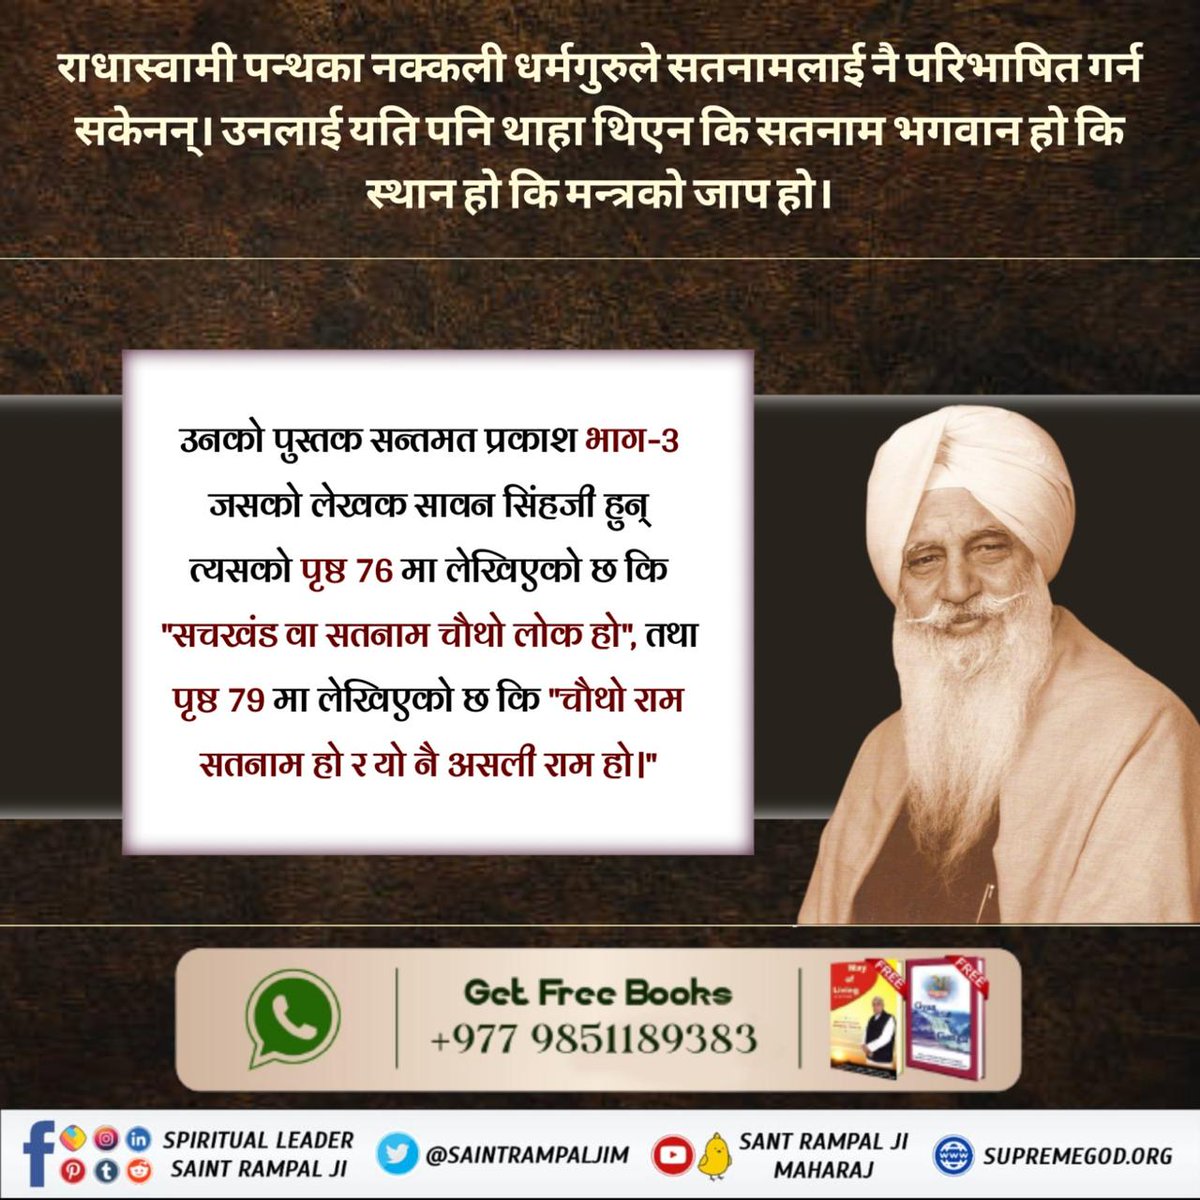 #राधास्वामी_पन्थको_सत्यता The Radha Soami Panth's teachings are based on deception. They claim to offer a path to enlightenment, but in reality they only lead to confusion and delusion.